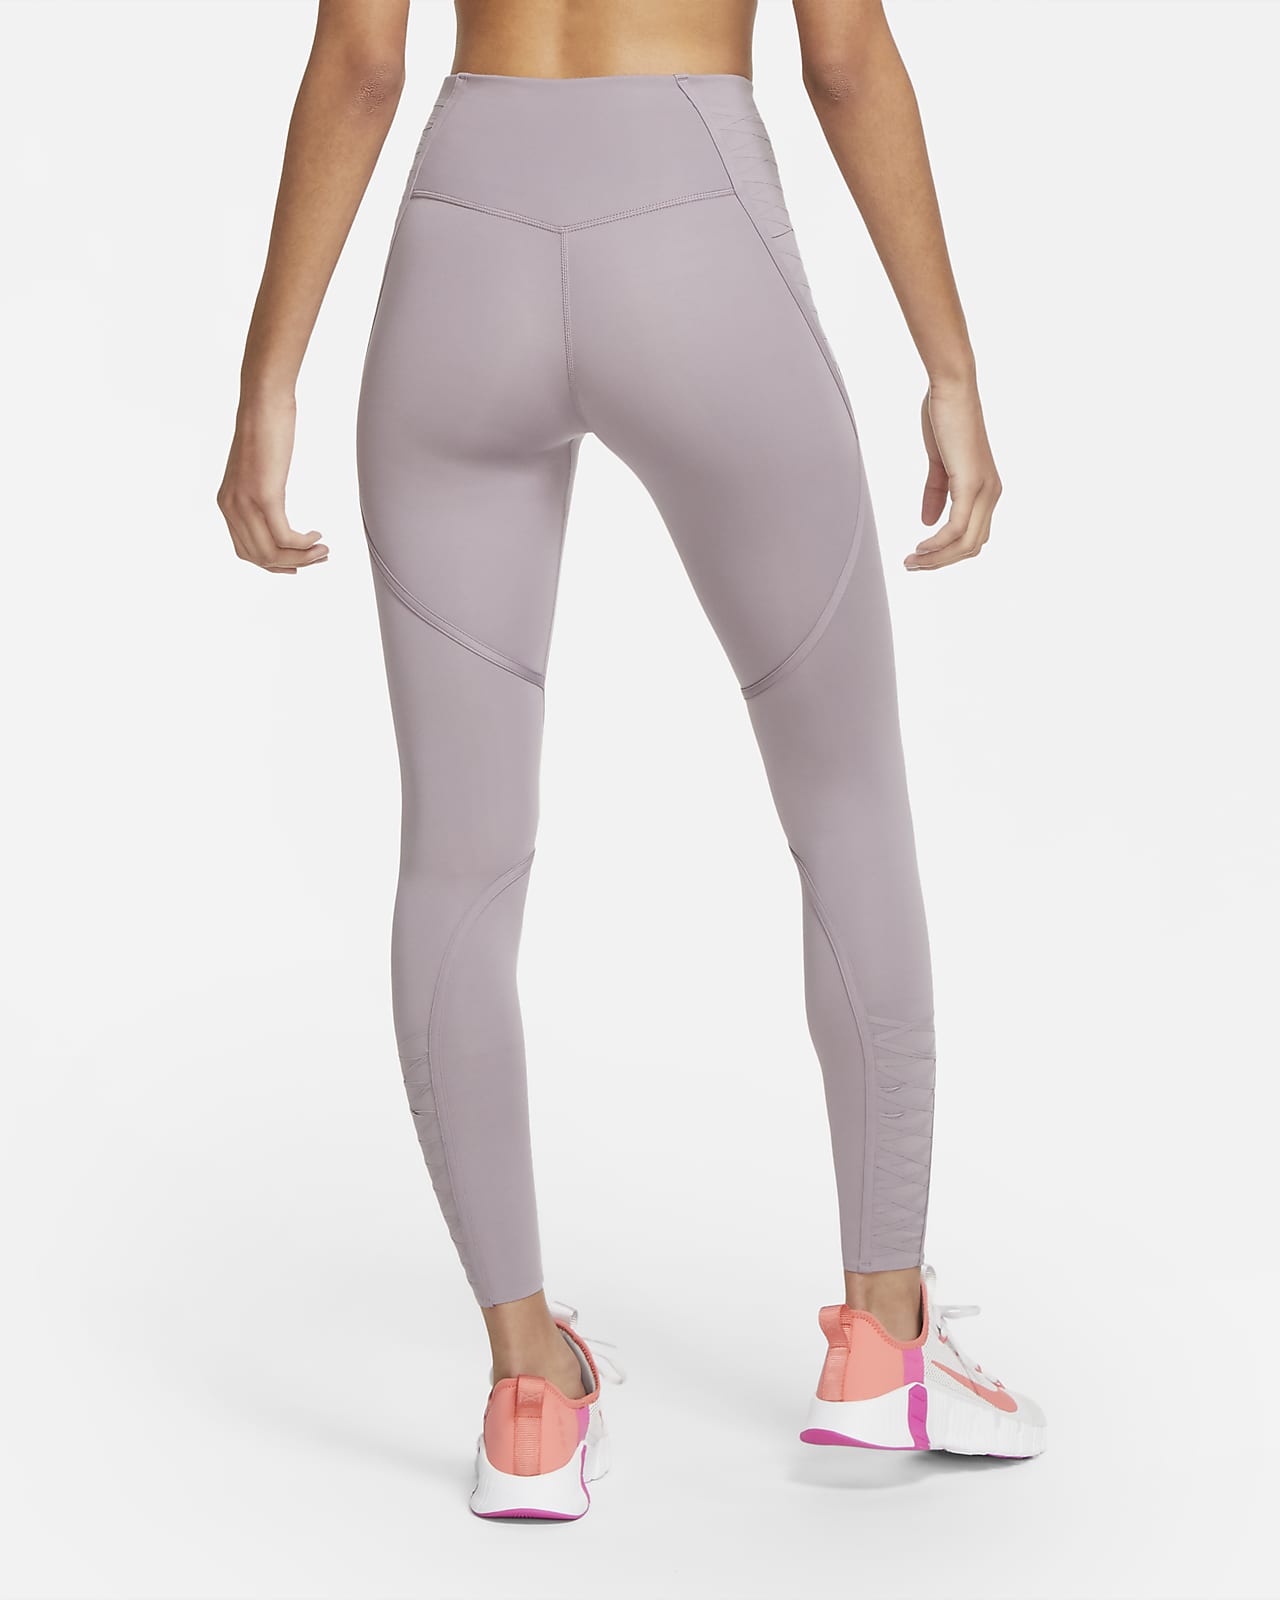 nike one tights review